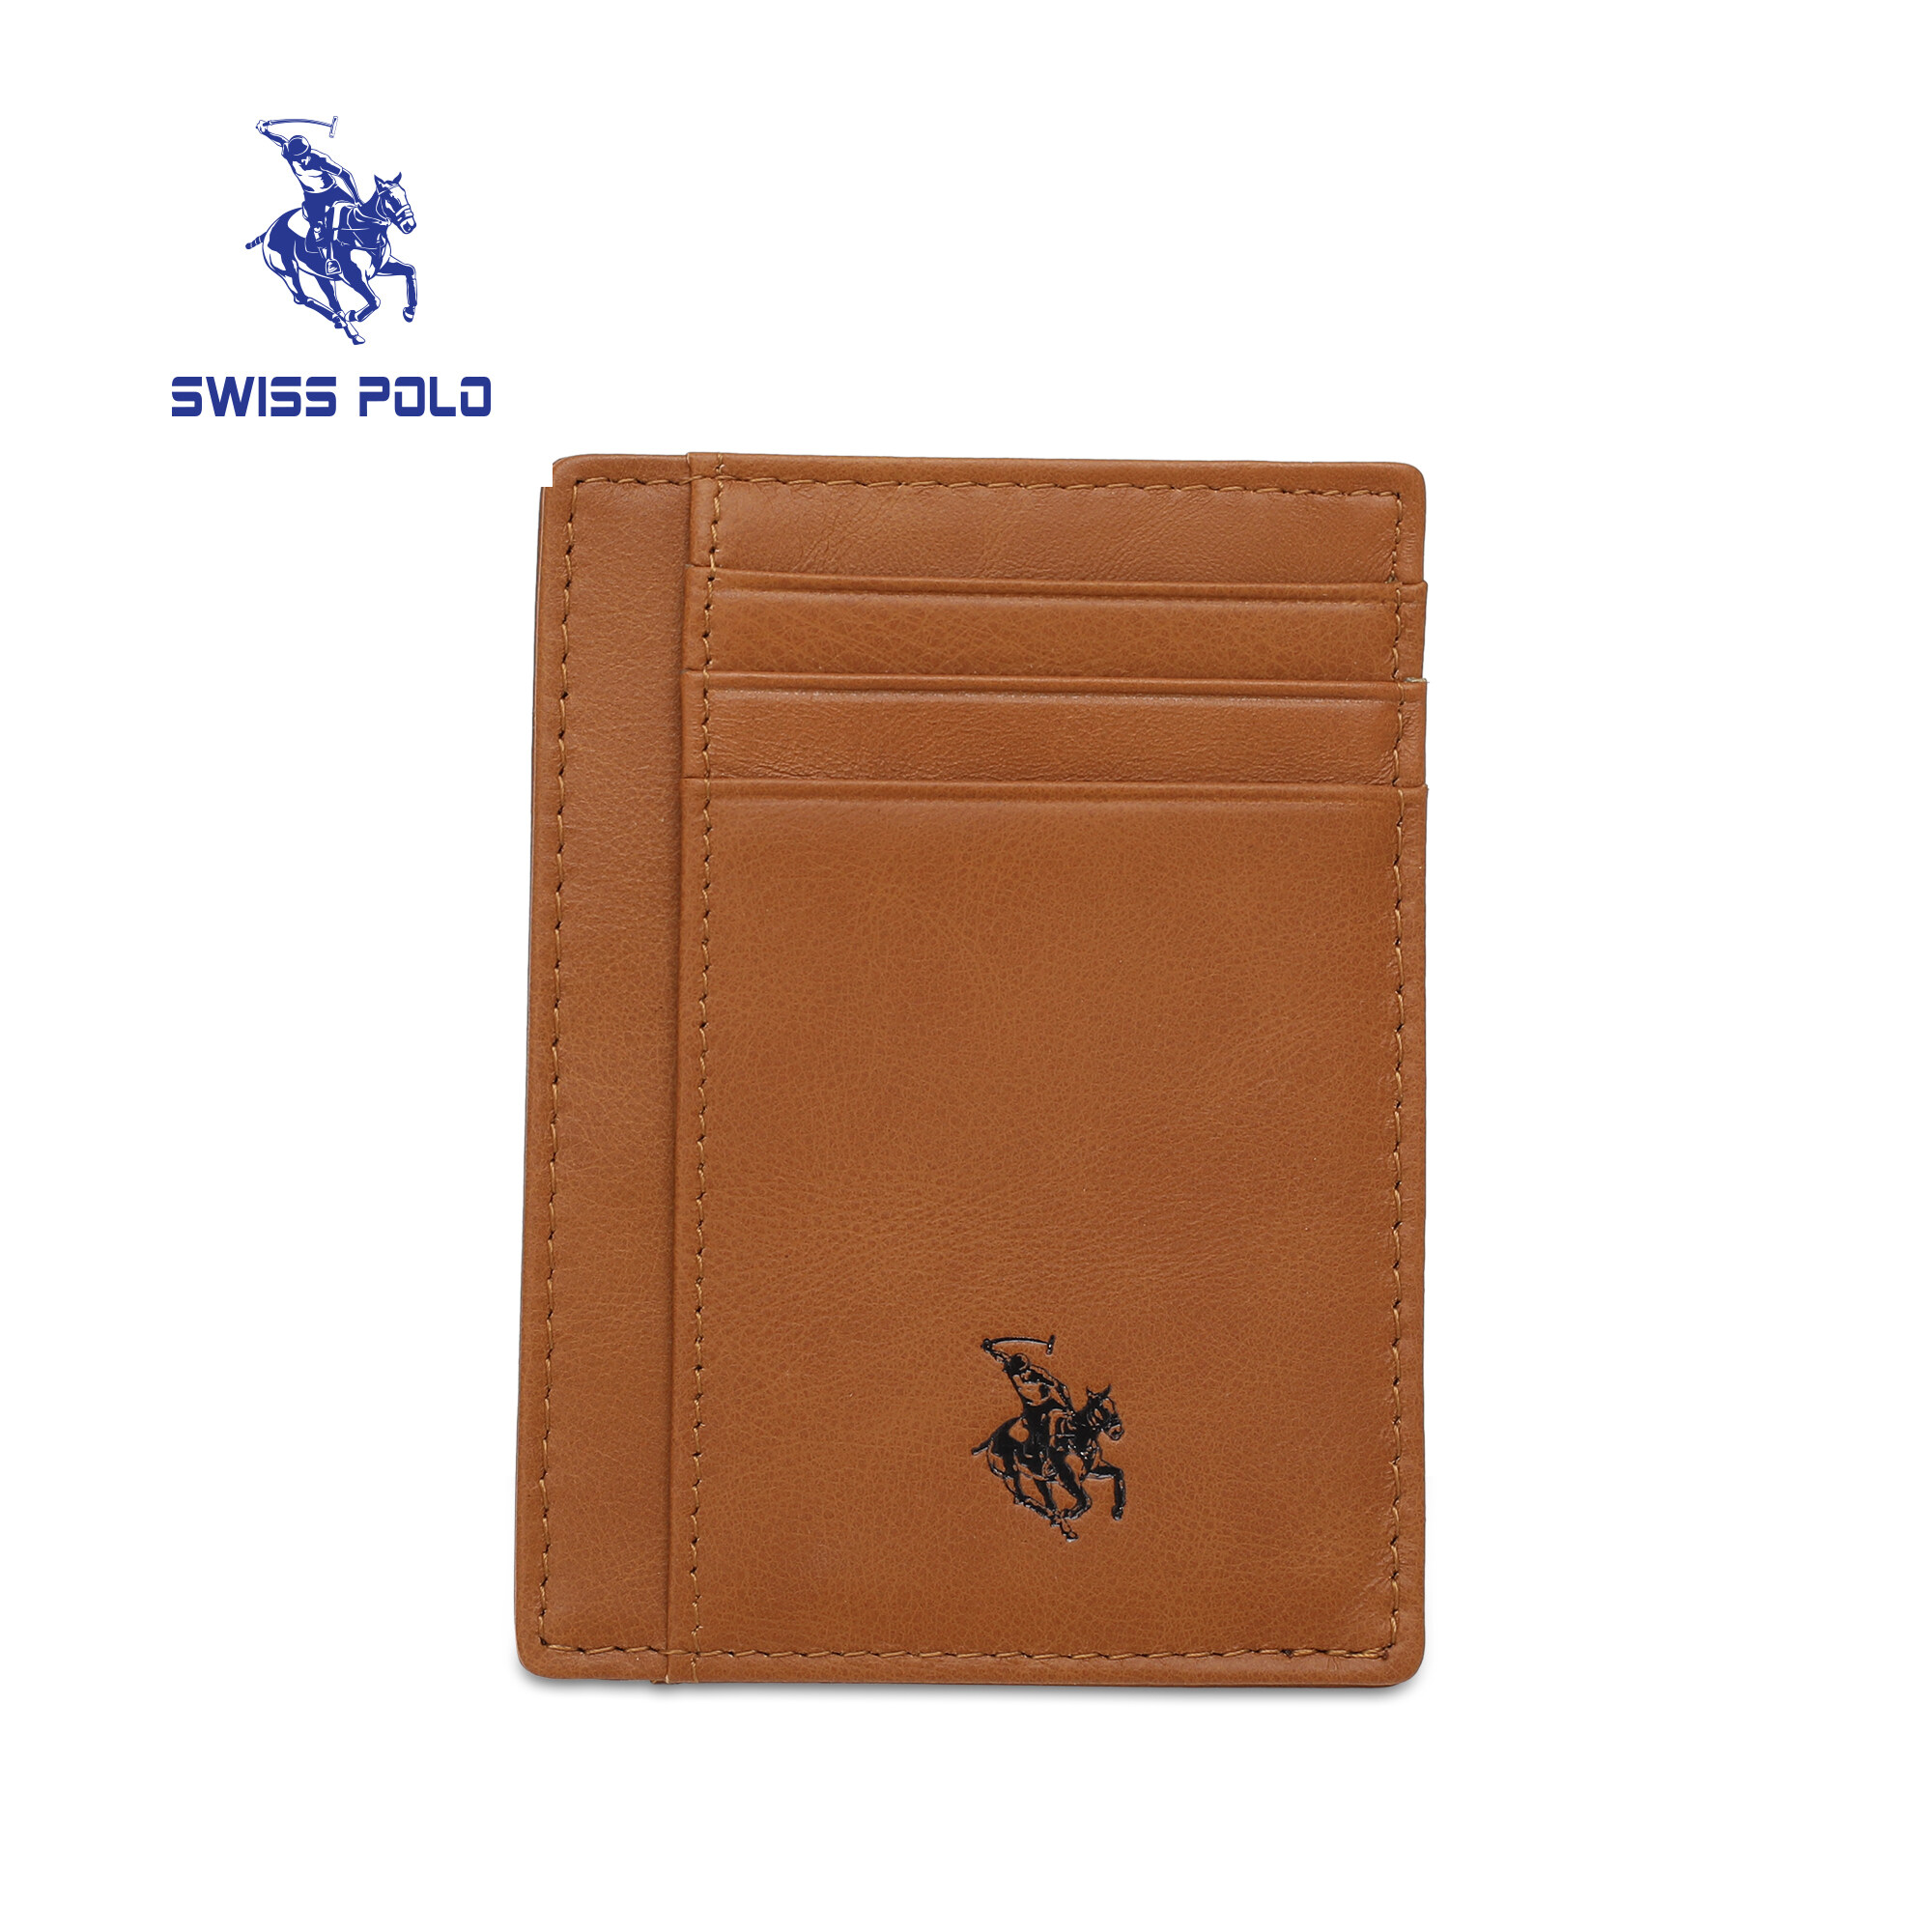 SWISS POLO Genuine Leather RFID Coin/Card Pouch/Card Holder SW 161-3 BROWN